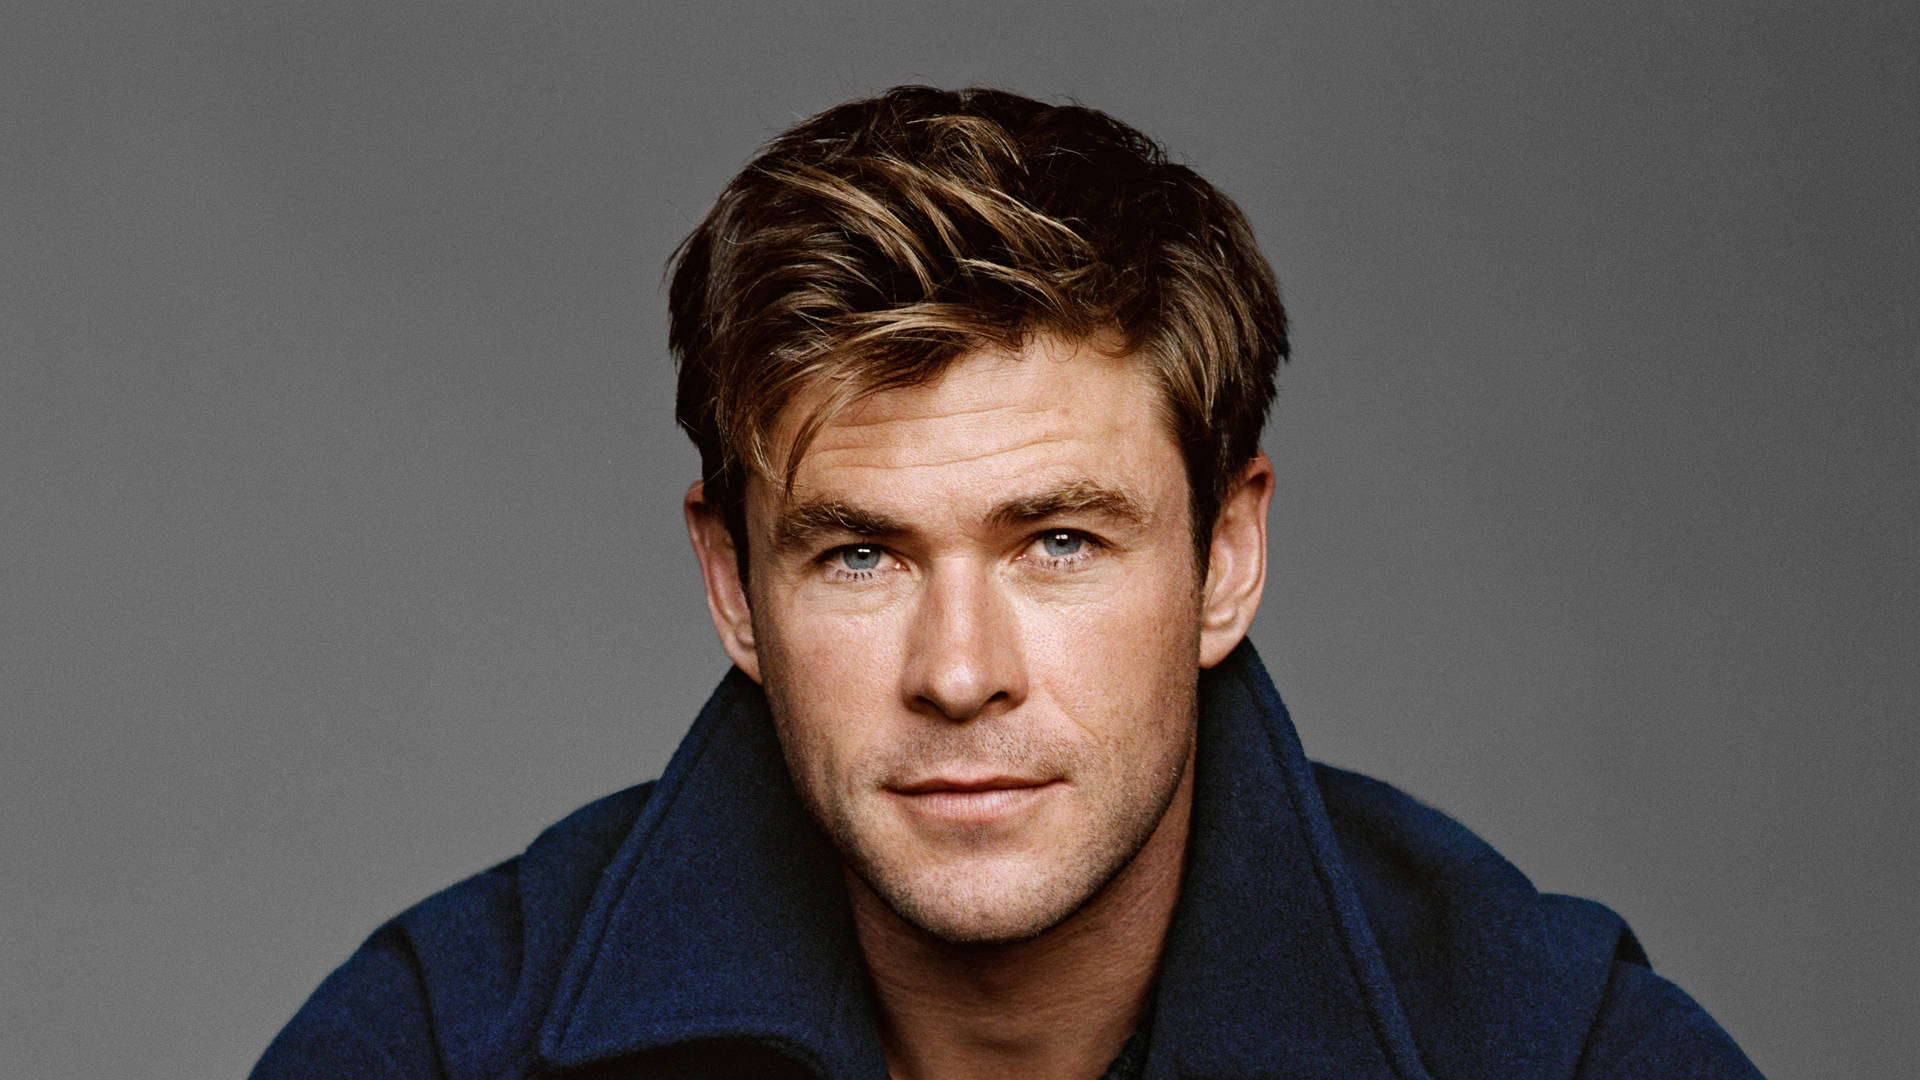 Chris Hemsworth strikes a pose in a blue jacket. Wallpaper